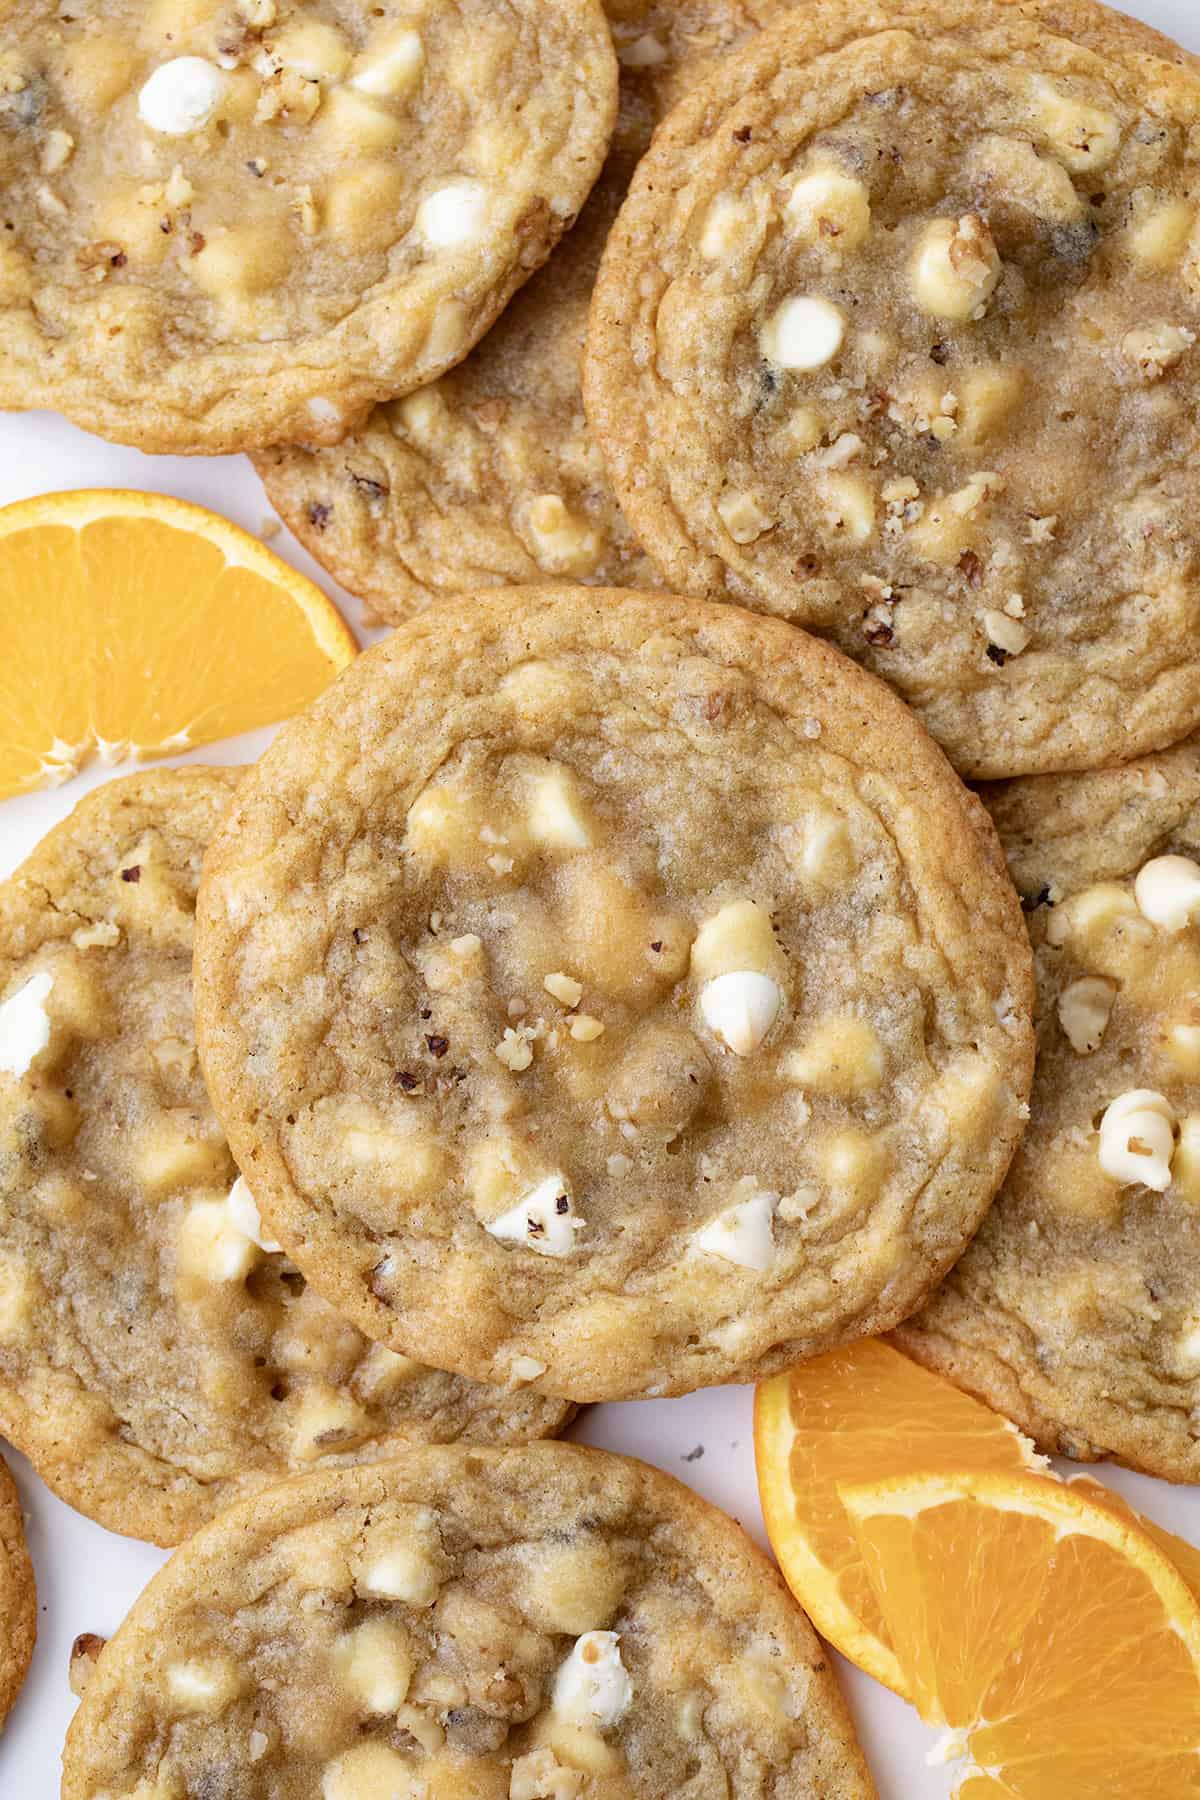 CLose up of White Chocolate Orange Cookies with nuts.